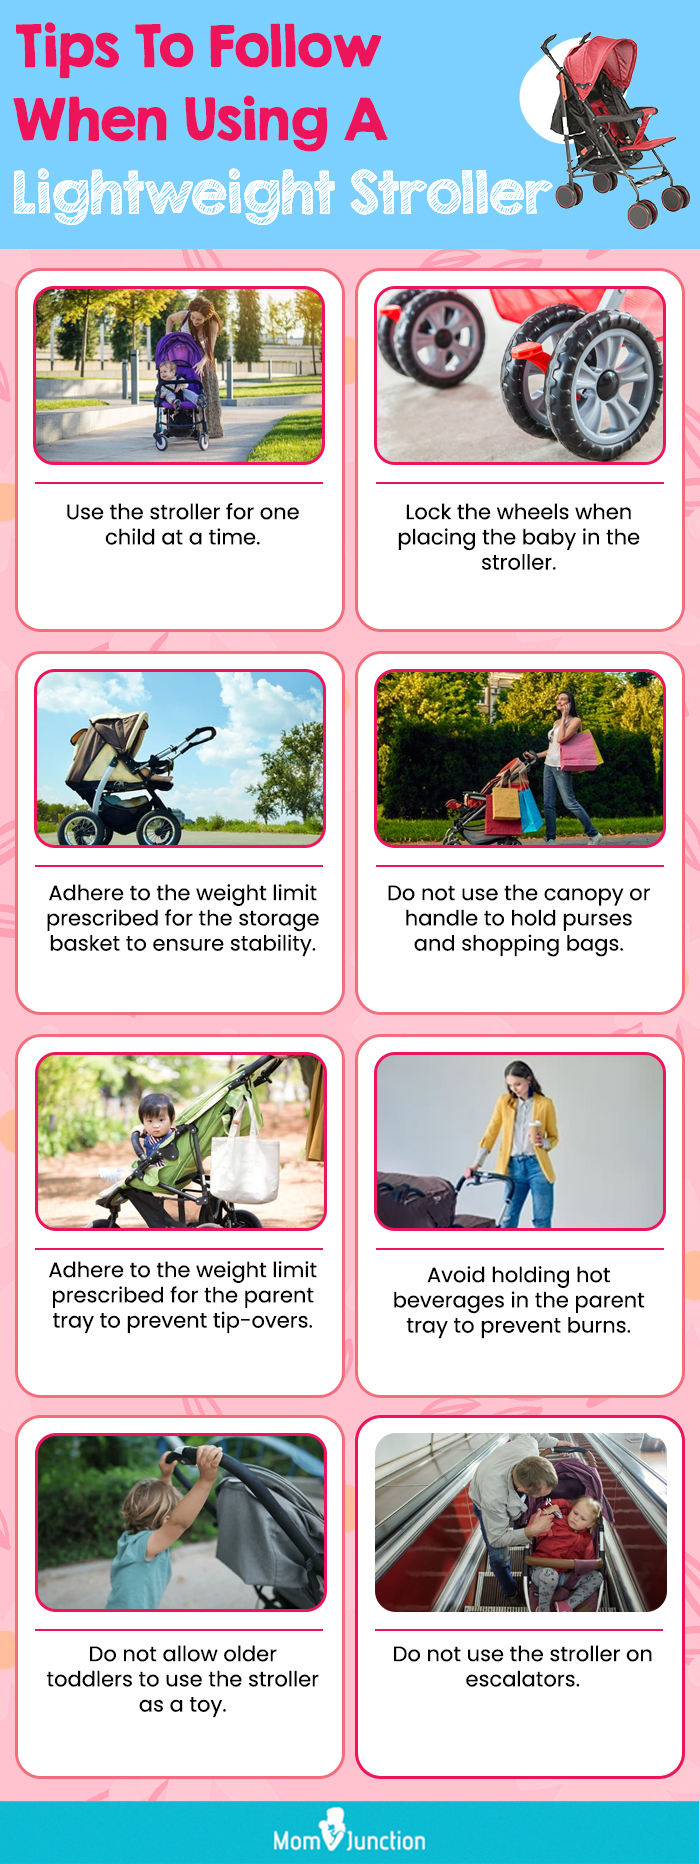 Tips To Follow When Using A Lightweight Stroller (infographic)